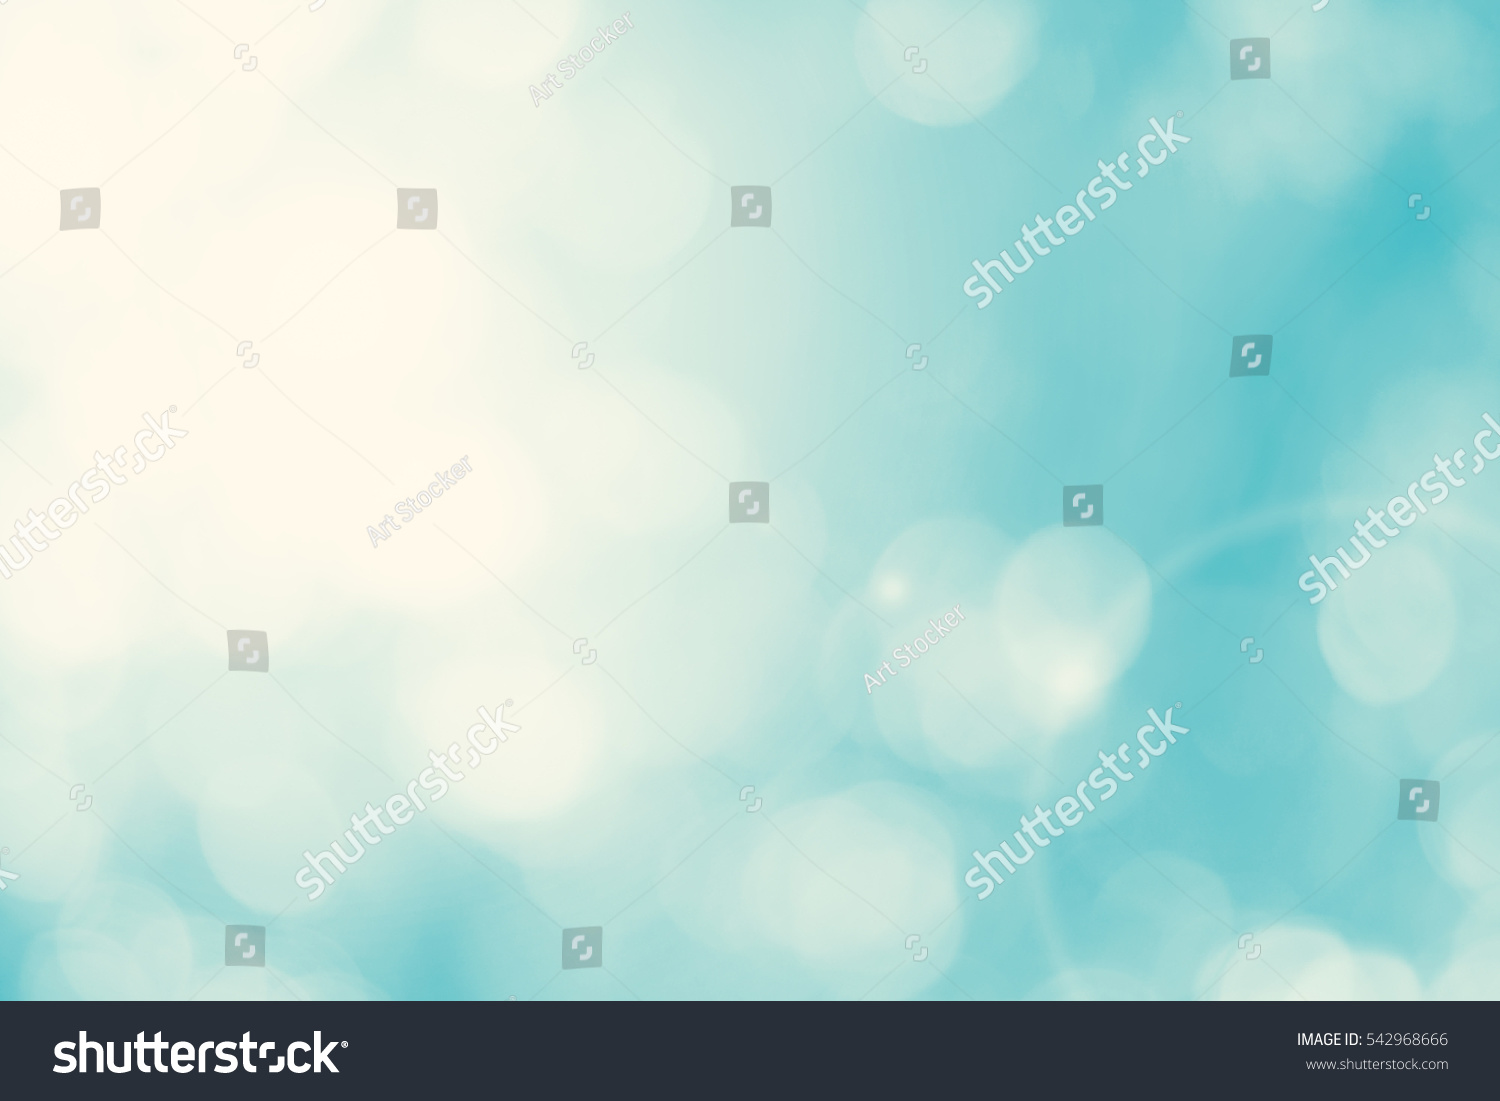 Blur dream turquoise shade clean morning nature with bokeh background concept modern csr theme, eco spring, baptism background, fresh mint green bio farm. Abstract blue cyan shade in summer wallpaper #542968666